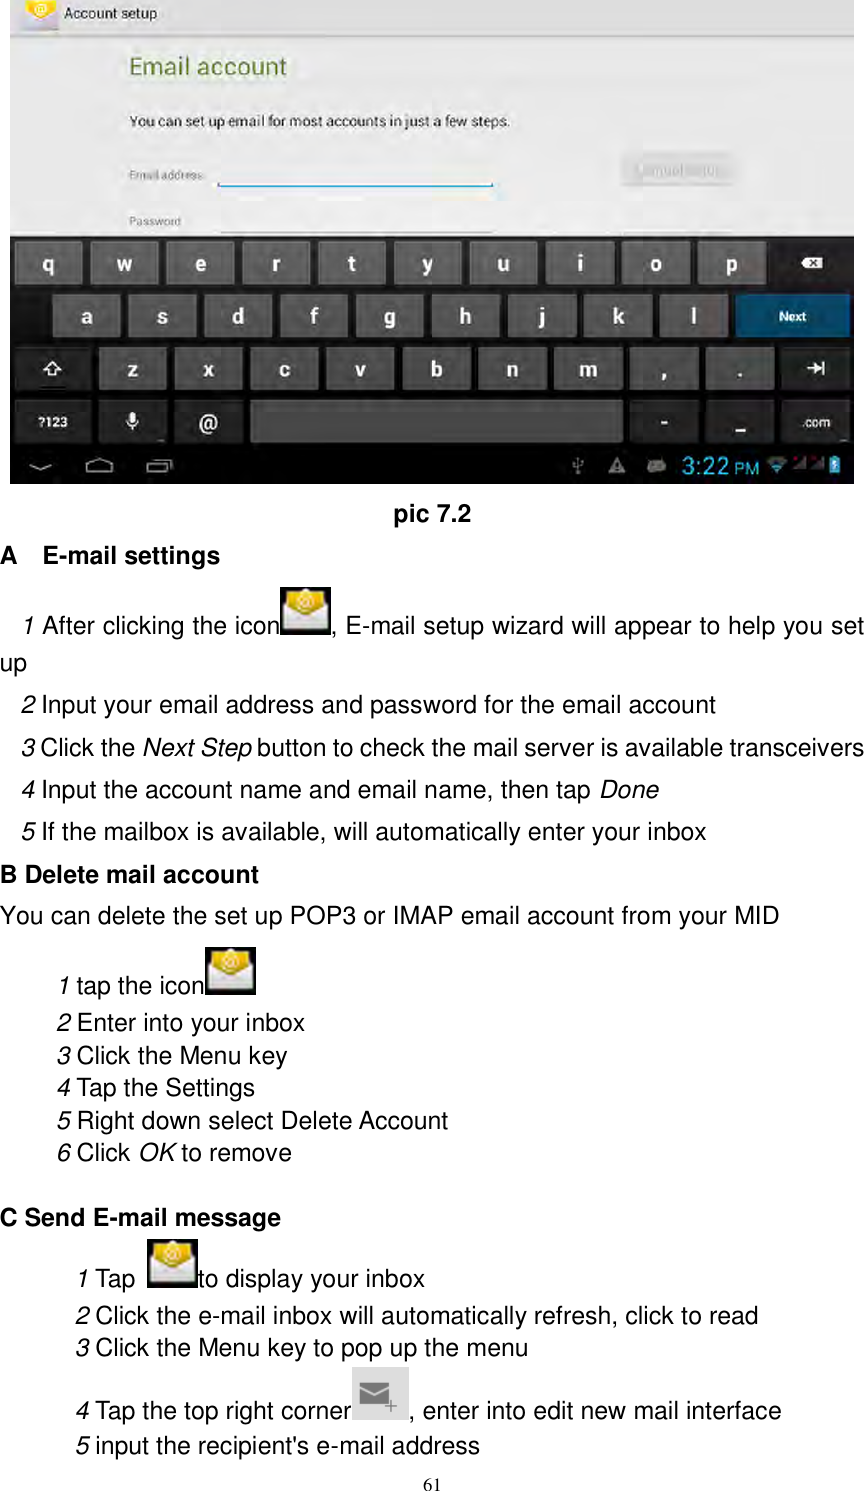      61  pic 7.2 A    E-mail settings 1 After clicking the icon , E-mail setup wizard will appear to help you set up 2 Input your email address and password for the email account 3 Click the Next Step button to check the mail server is available transceivers 4 Input the account name and email name, then tap Done 5 If the mailbox is available, will automatically enter your inbox B Delete mail account You can delete the set up POP3 or IMAP email account from your MID 1 tap the icon    2 Enter into your inbox 3 Click the Menu key 4 Tap the Settings 5 Right down select Delete Account 6 Click OK to remove  C Send E-mail message 1 Tap  to display your inbox 2 Click the e-mail inbox will automatically refresh, click to read 3 Click the Menu key to pop up the menu 4 Tap the top right corner , enter into edit new mail interface 5 input the recipient&apos;s e-mail address 